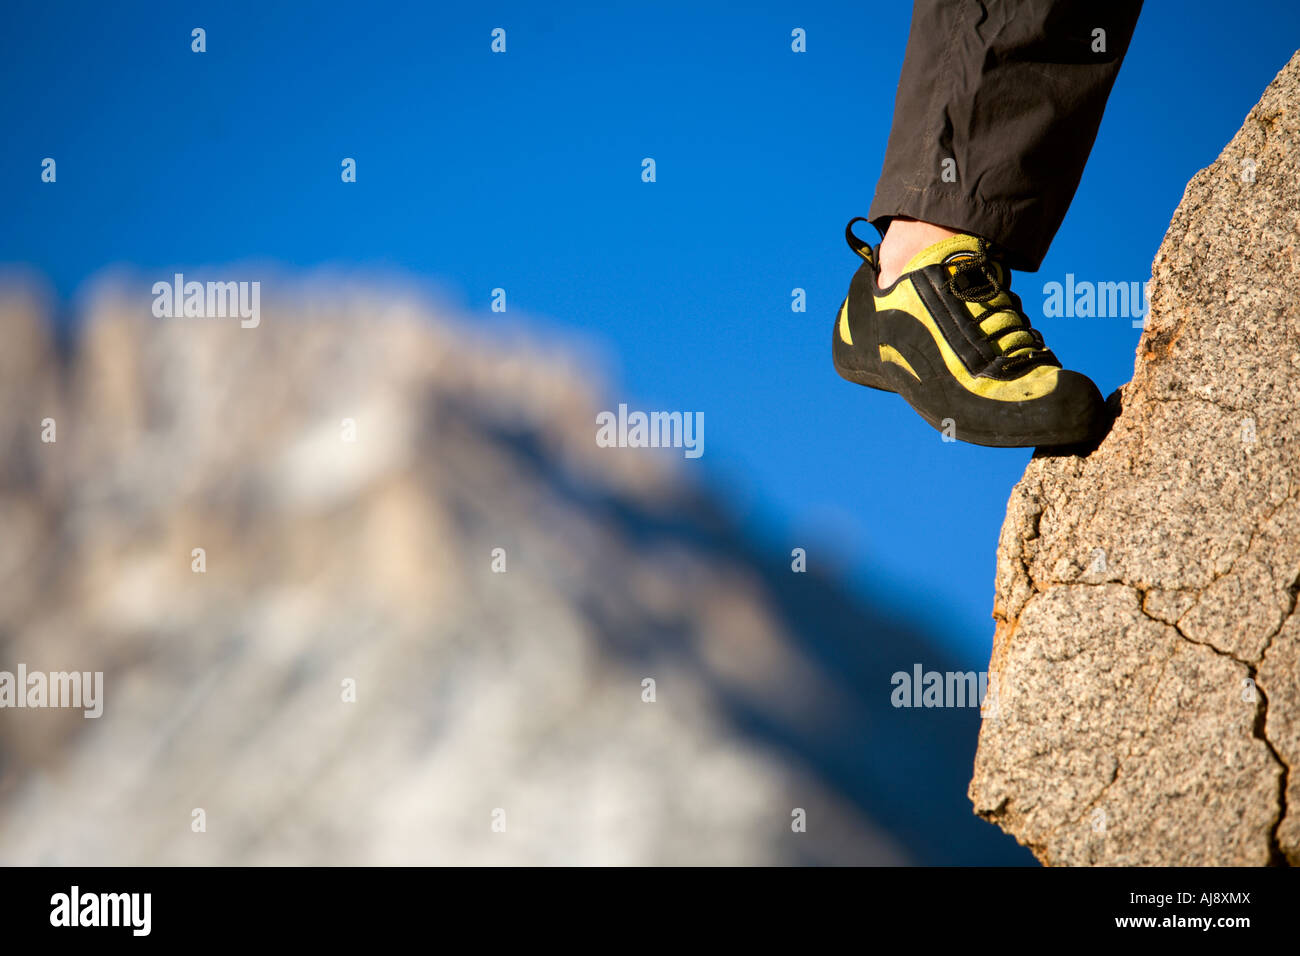 A climber's foot in a shoe on a foothold Stock Photo